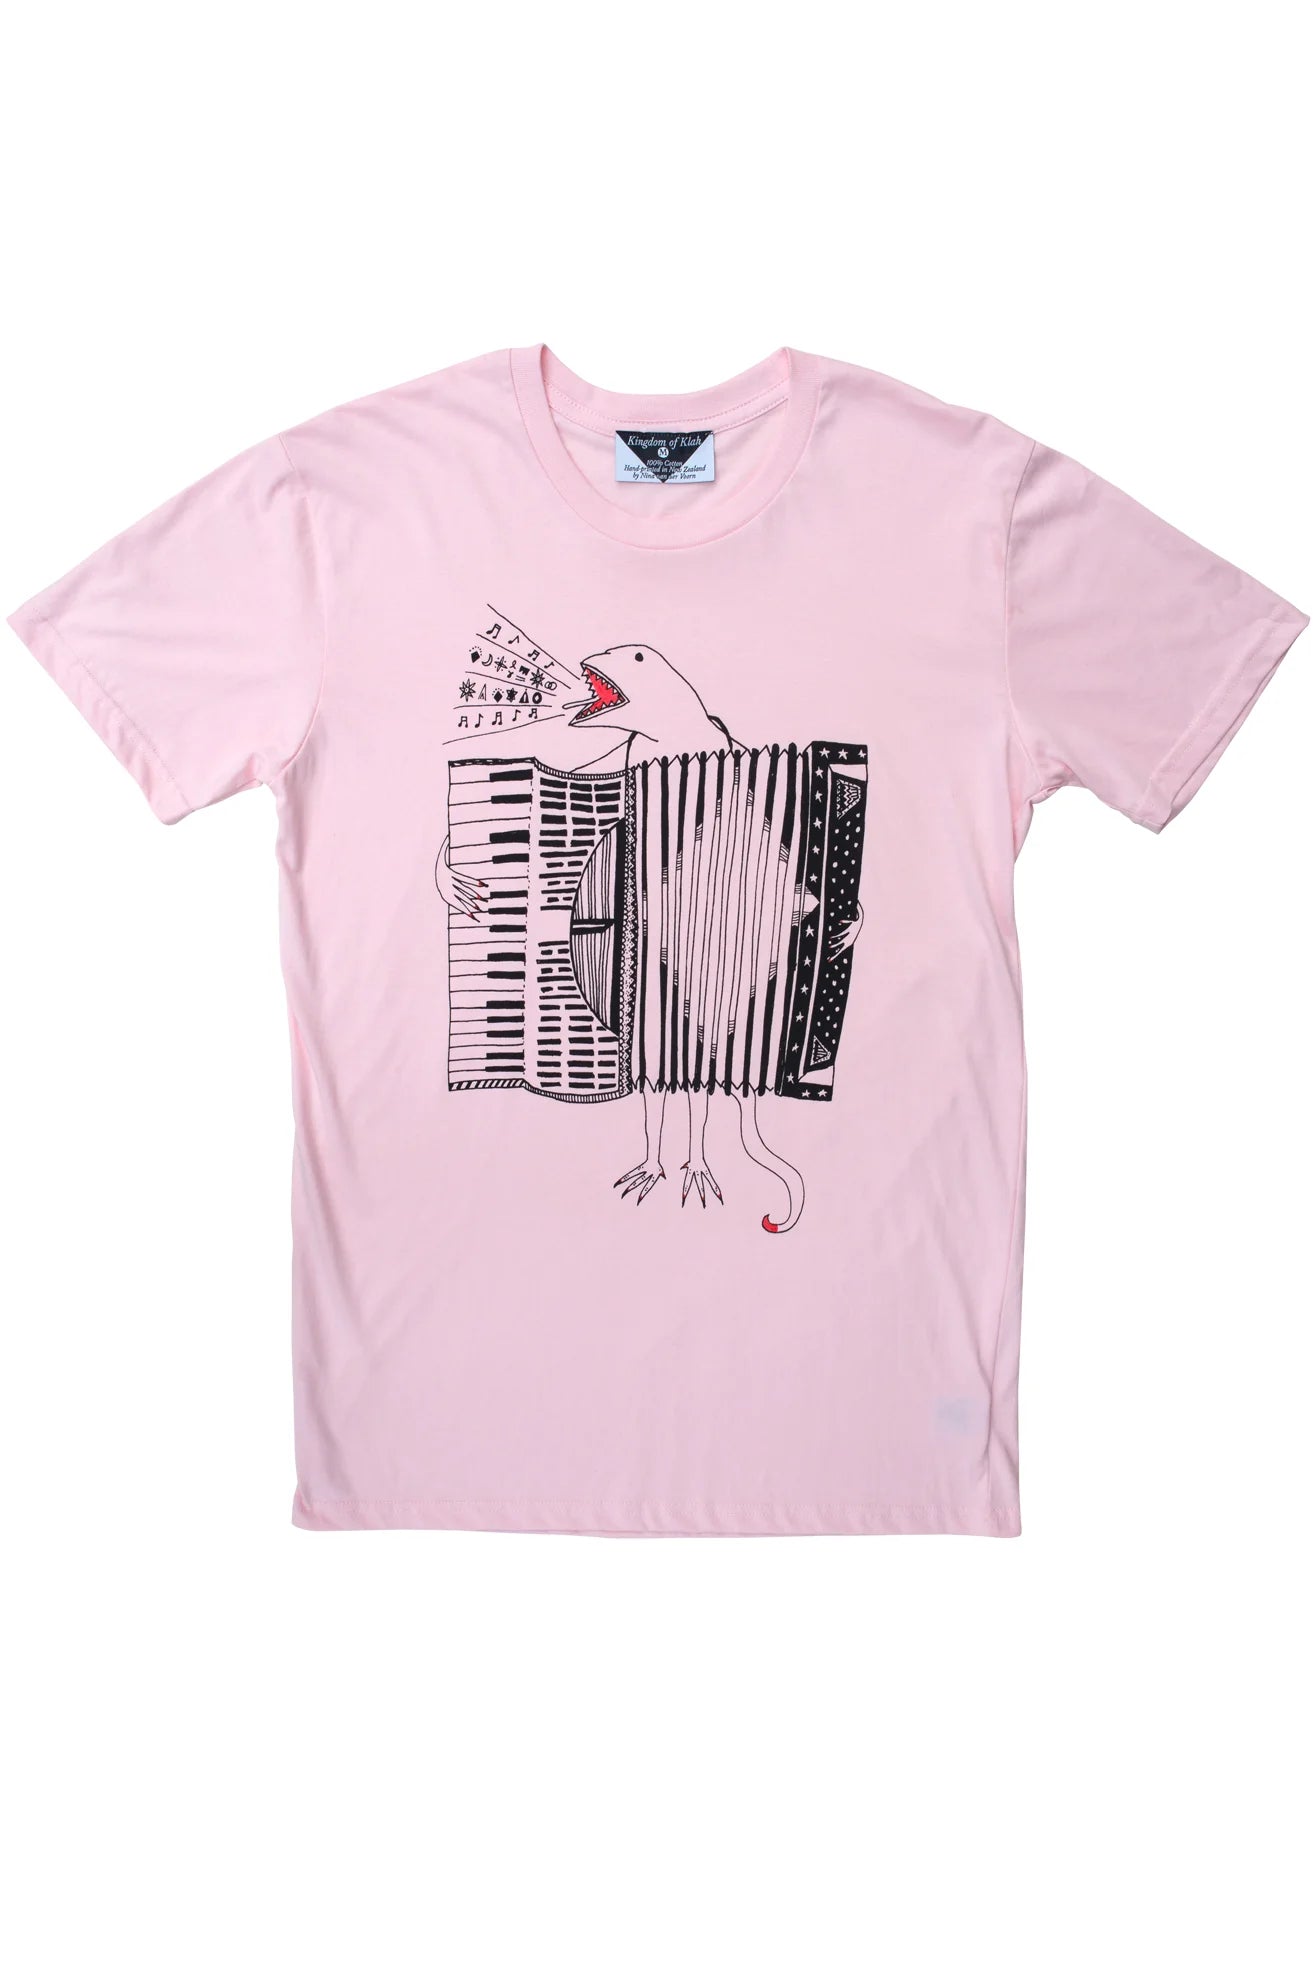 Men’s Tee - The Accordion of Unexpected Fortunes